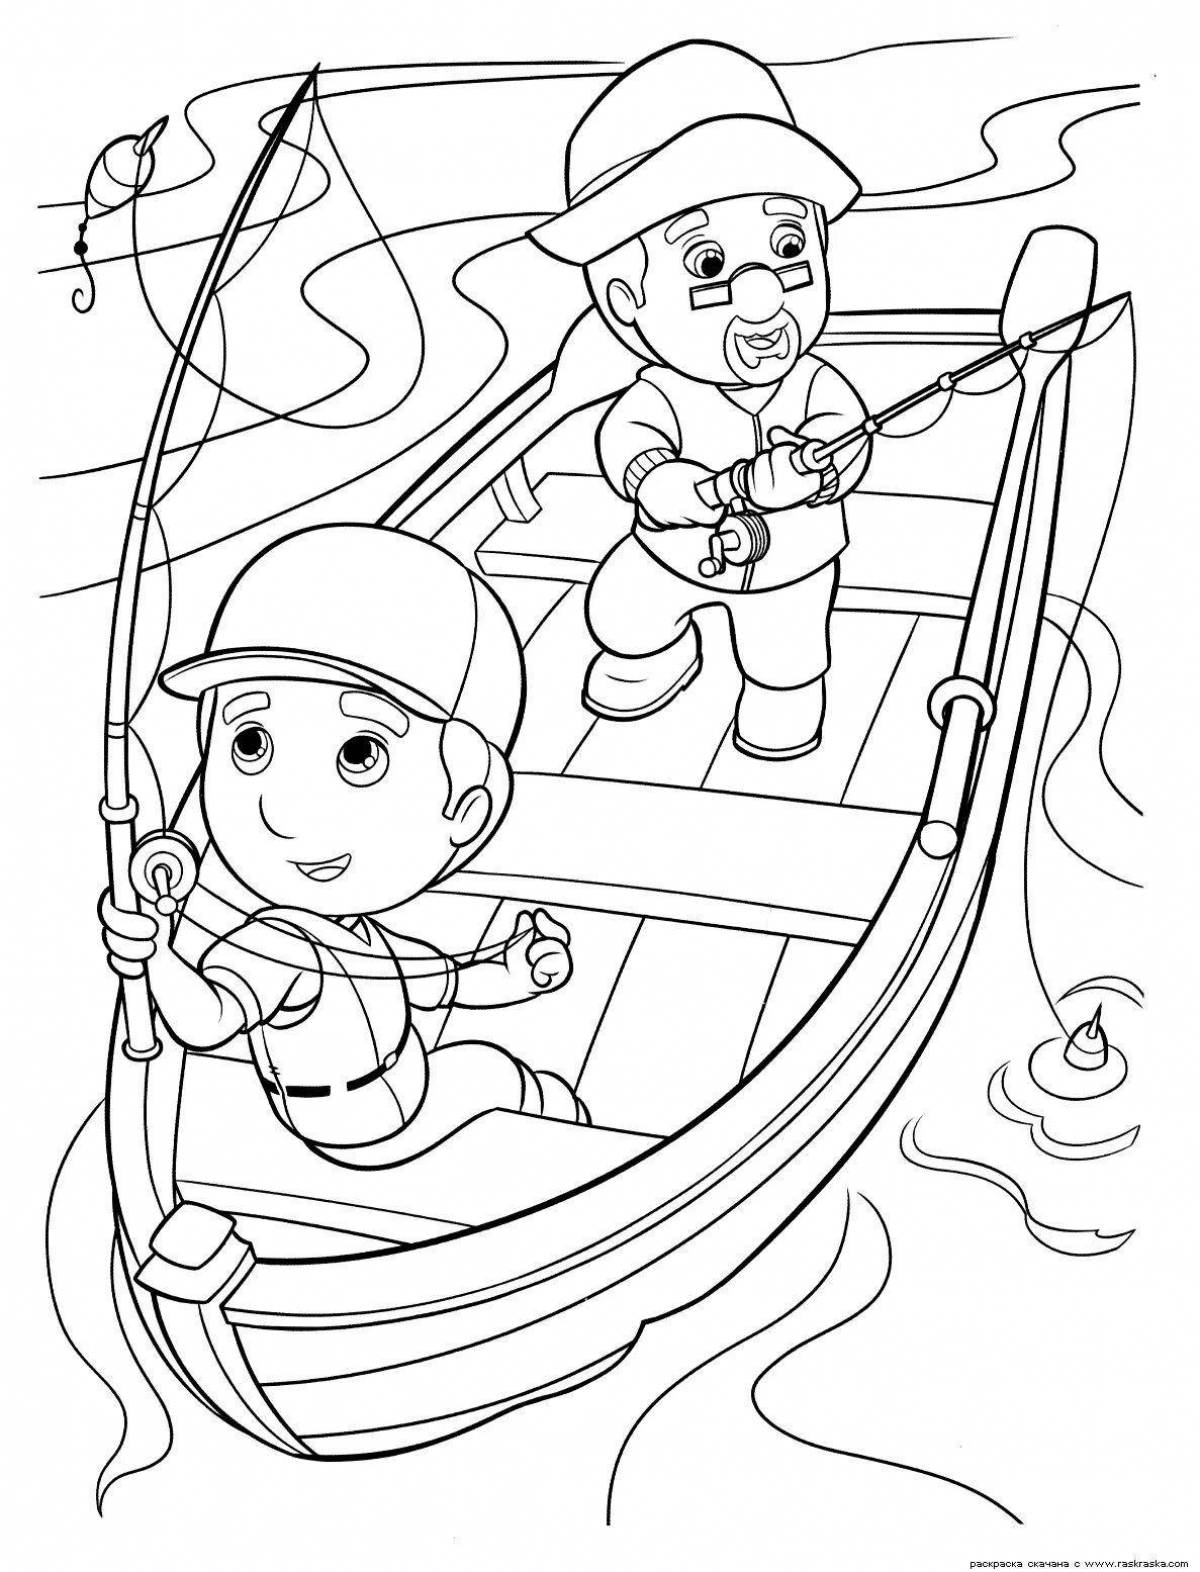 Colorful fishing coloring book for kids